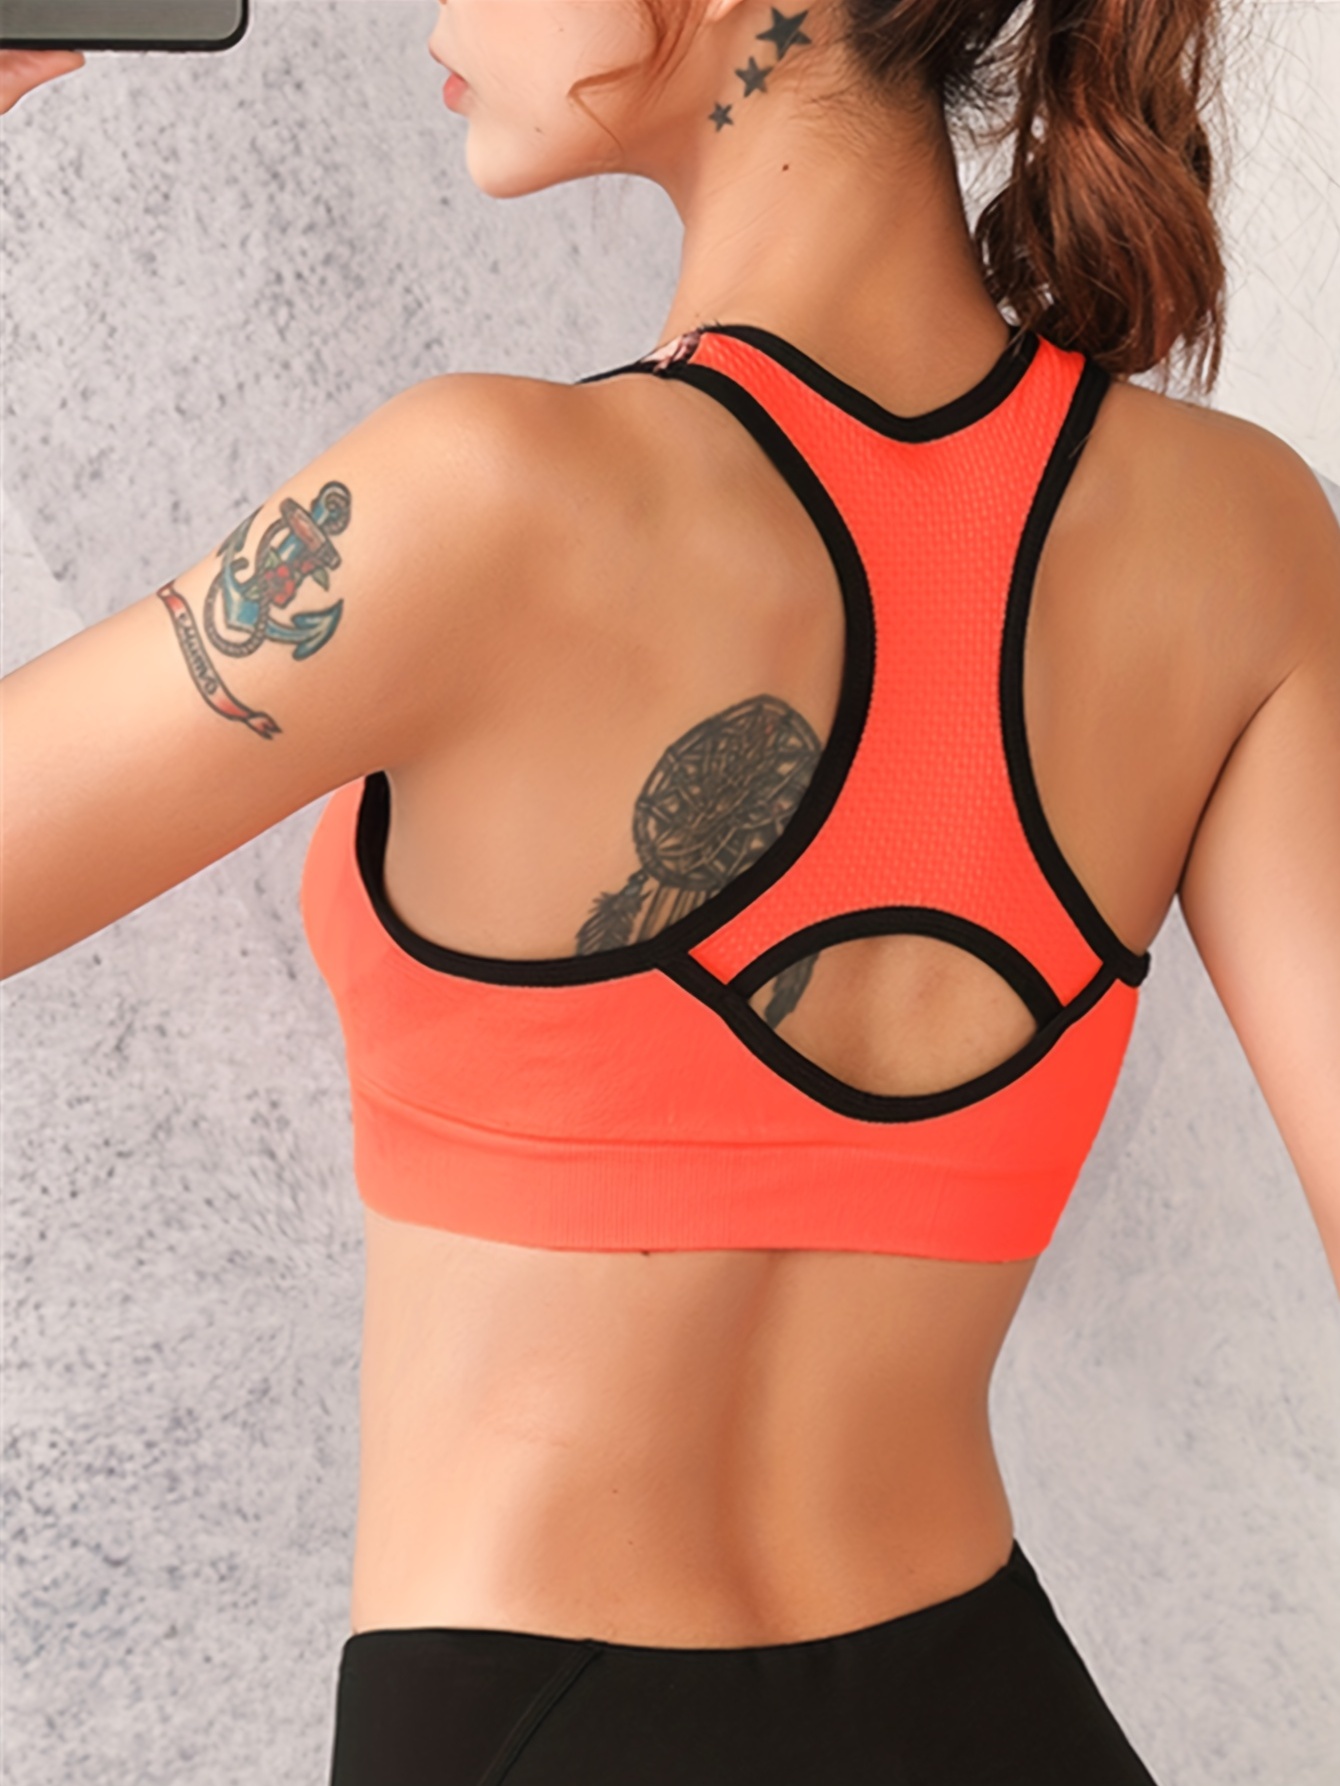 Sports Bra Women's Push Up Comfortable Bustier in Many Colours Bra